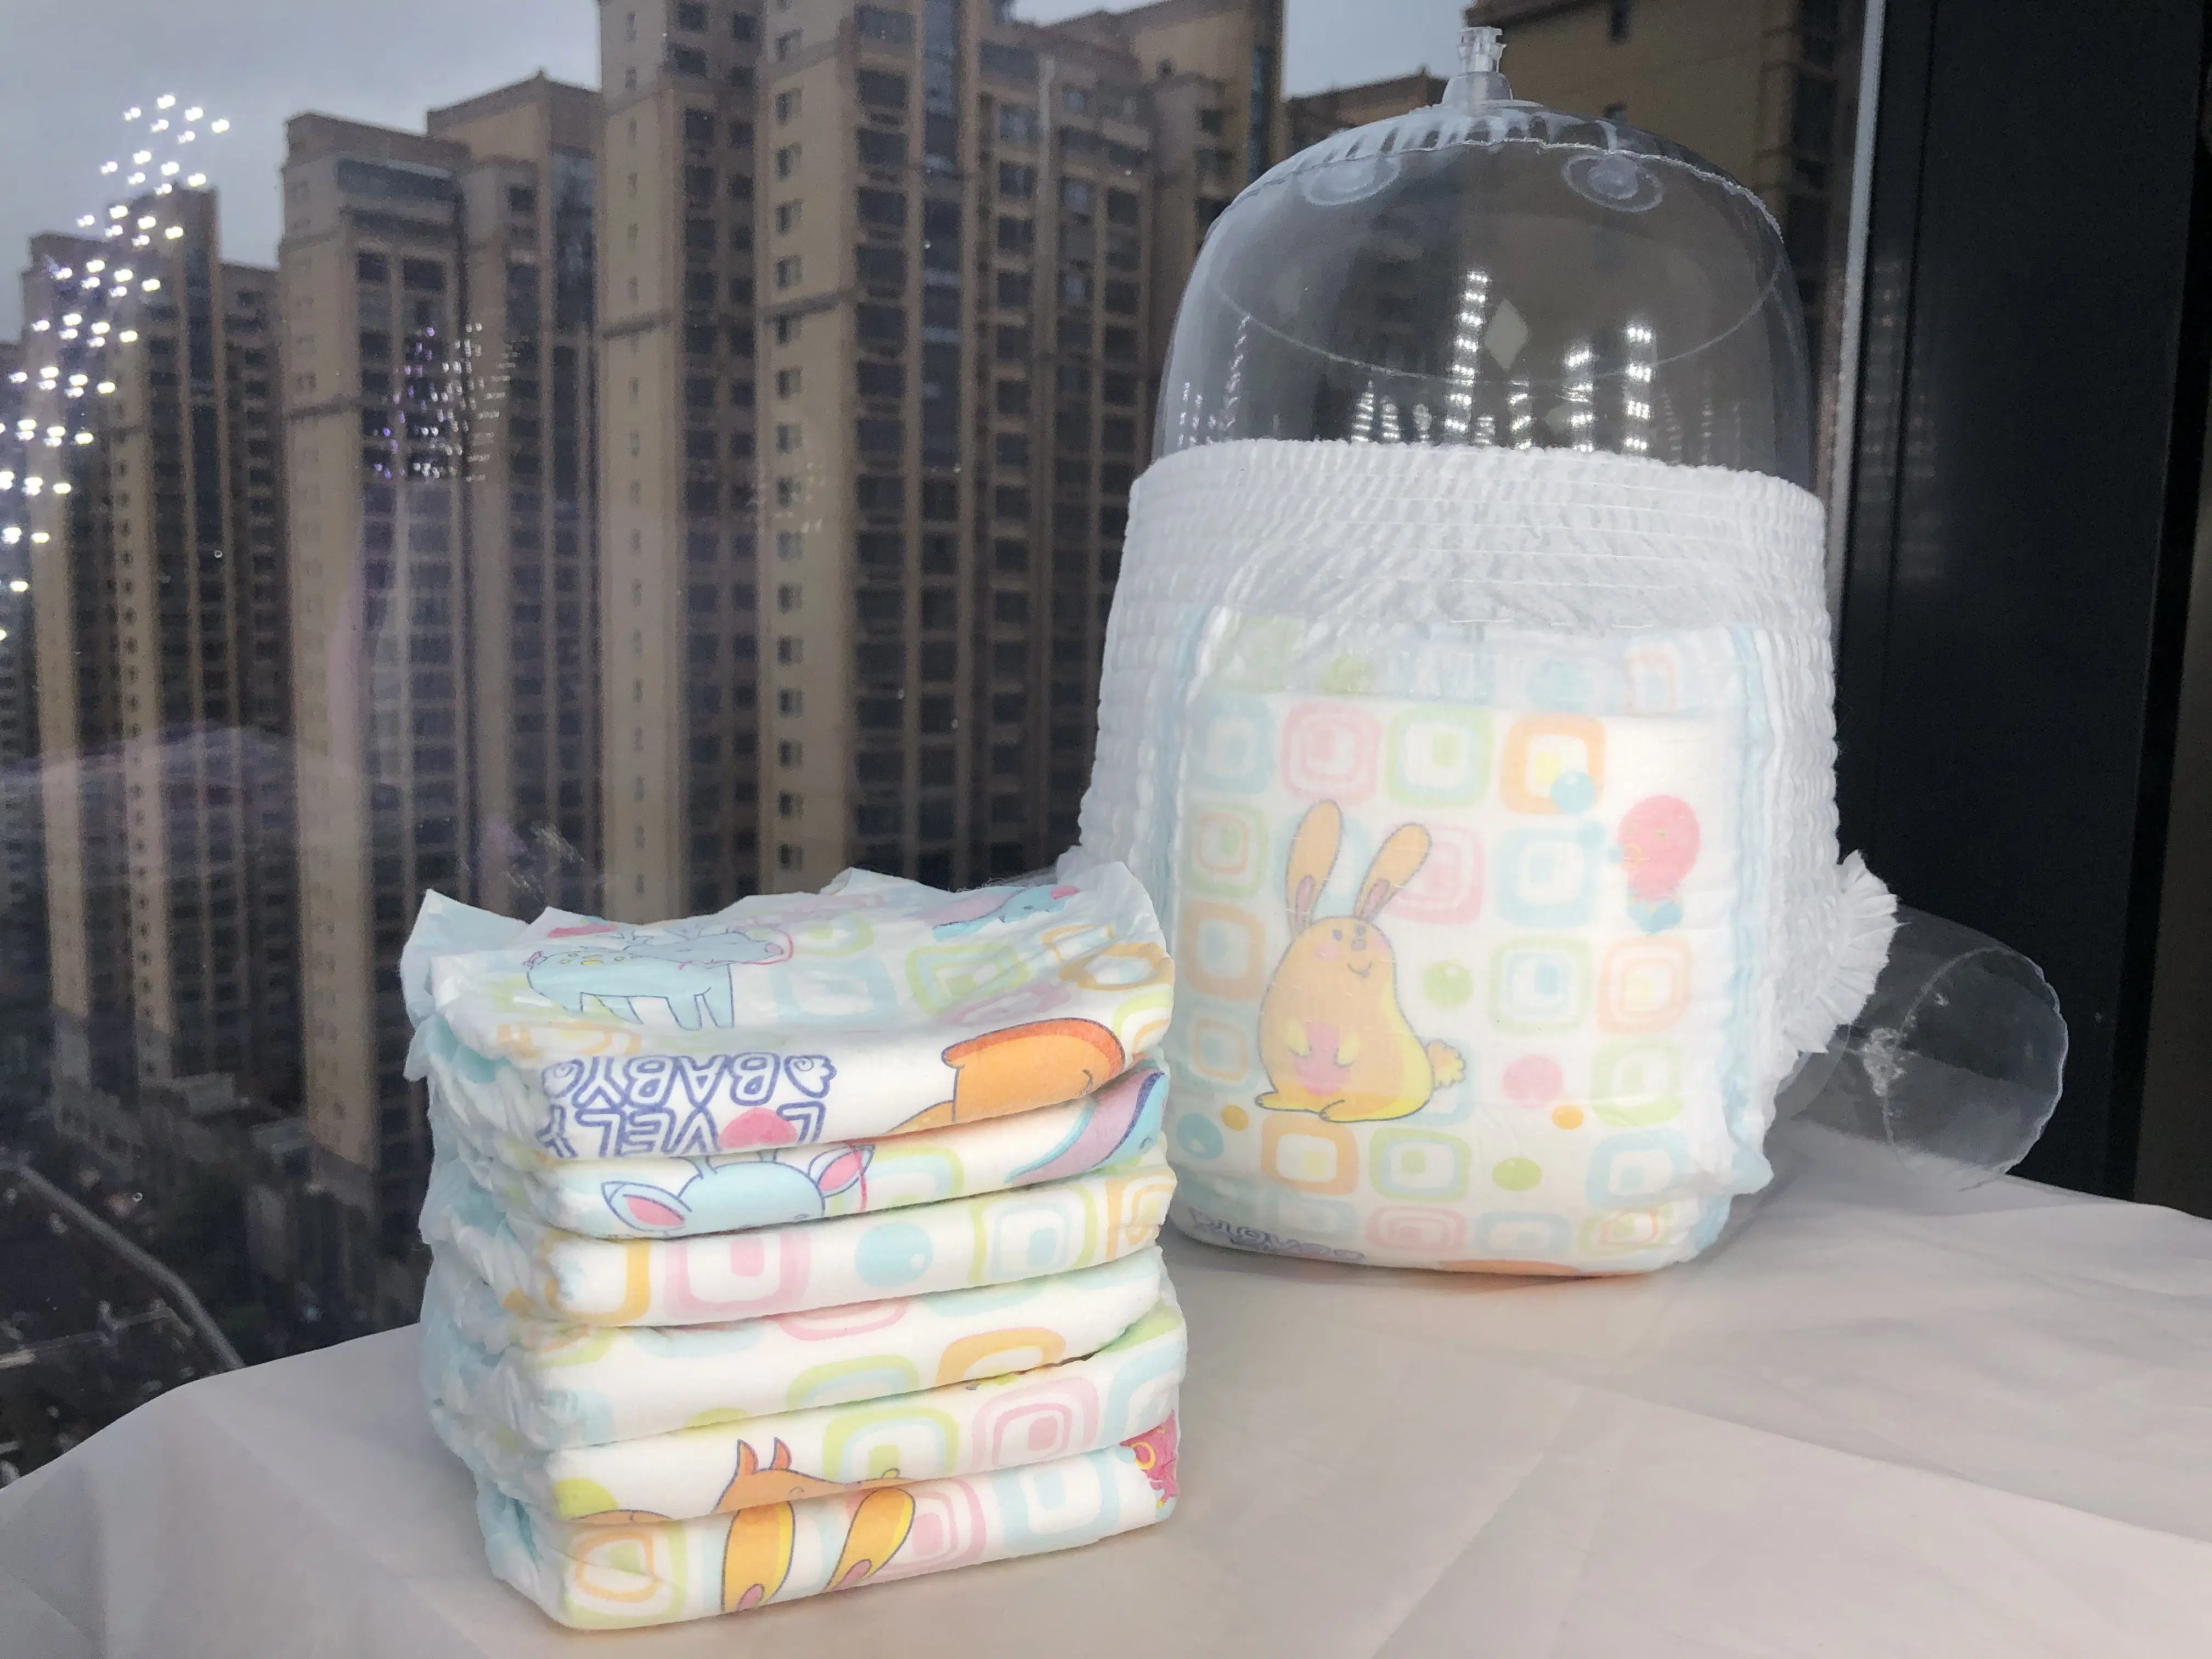 Disposable Baby Diapers Wholesale/Supplier by Chinese Factories Have High Absorption, Breathable, Dry and Soft Surface Layer. Popular